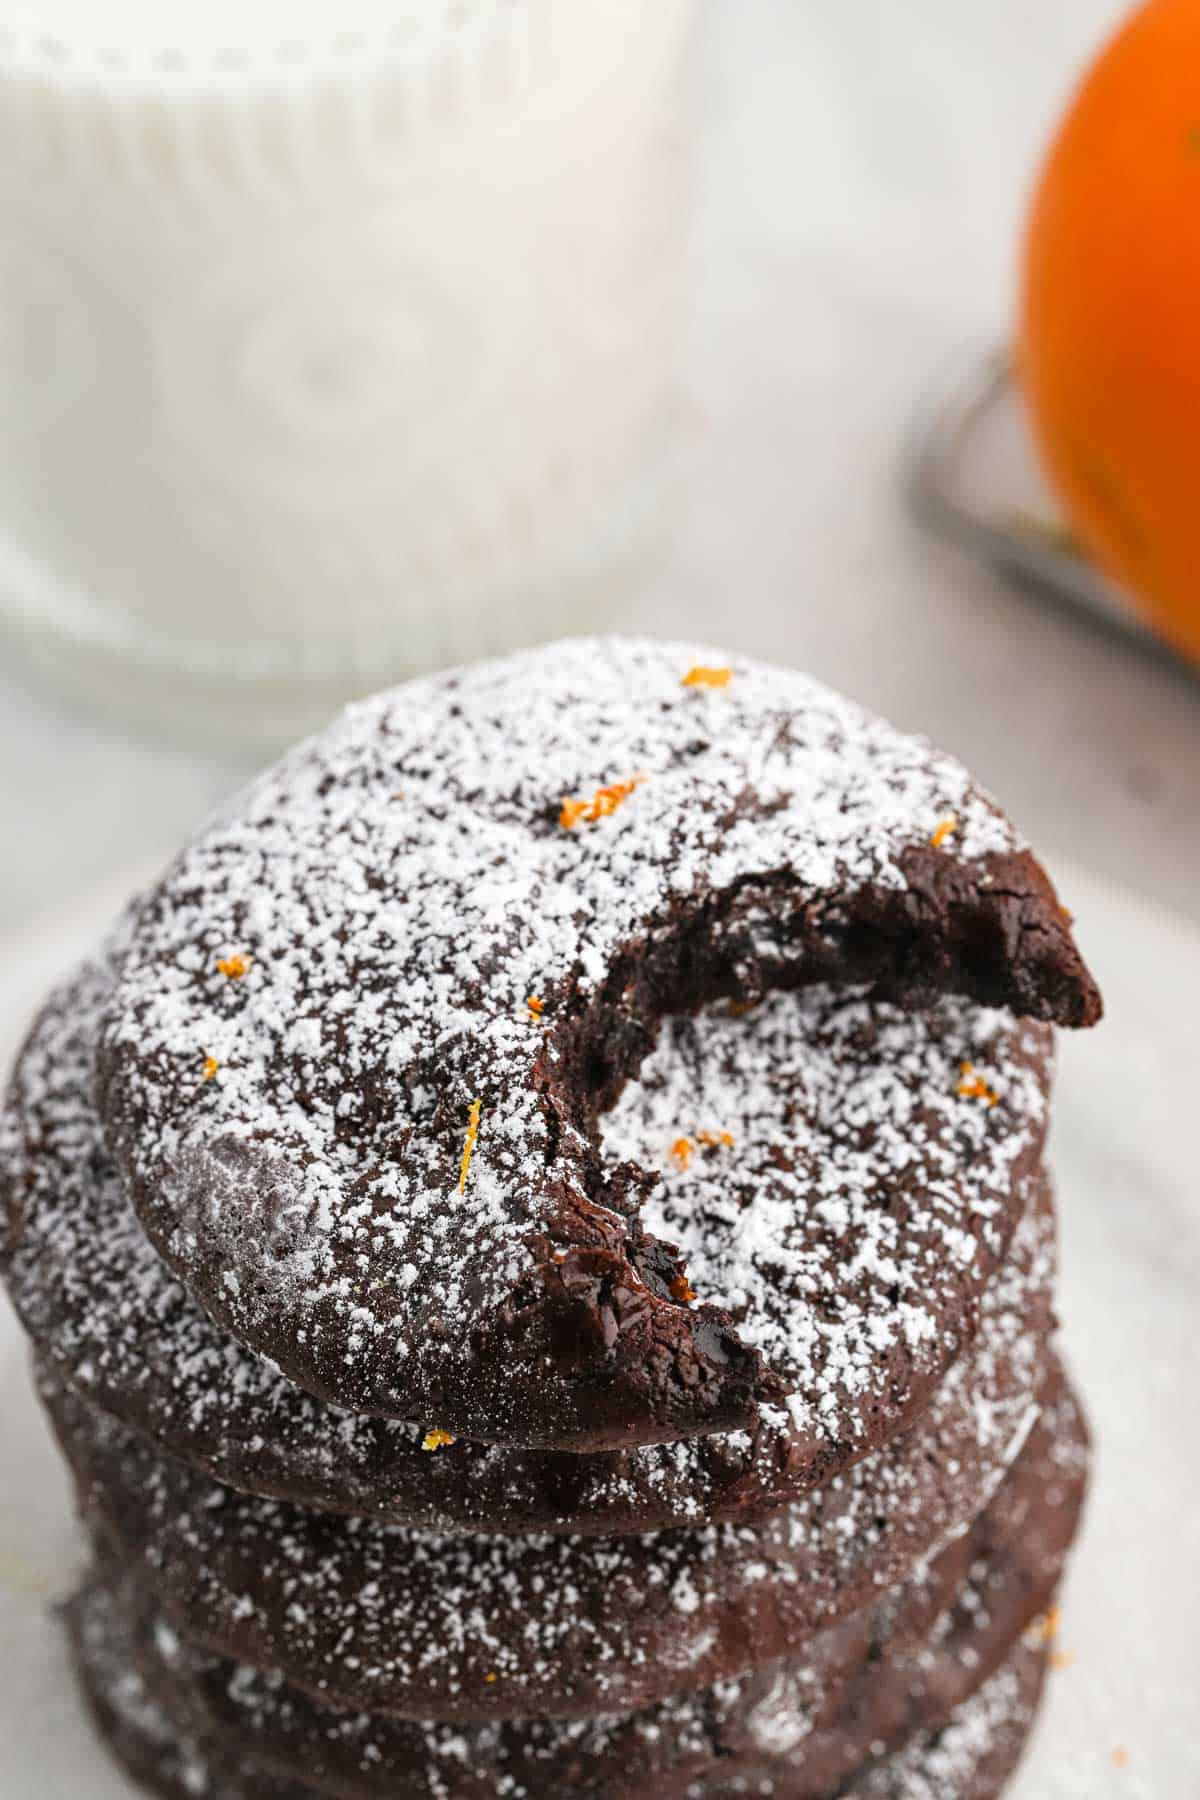 Stack of chocolate orange cookies on a plate with a bite missing from the top one and a glass of milk in the background.